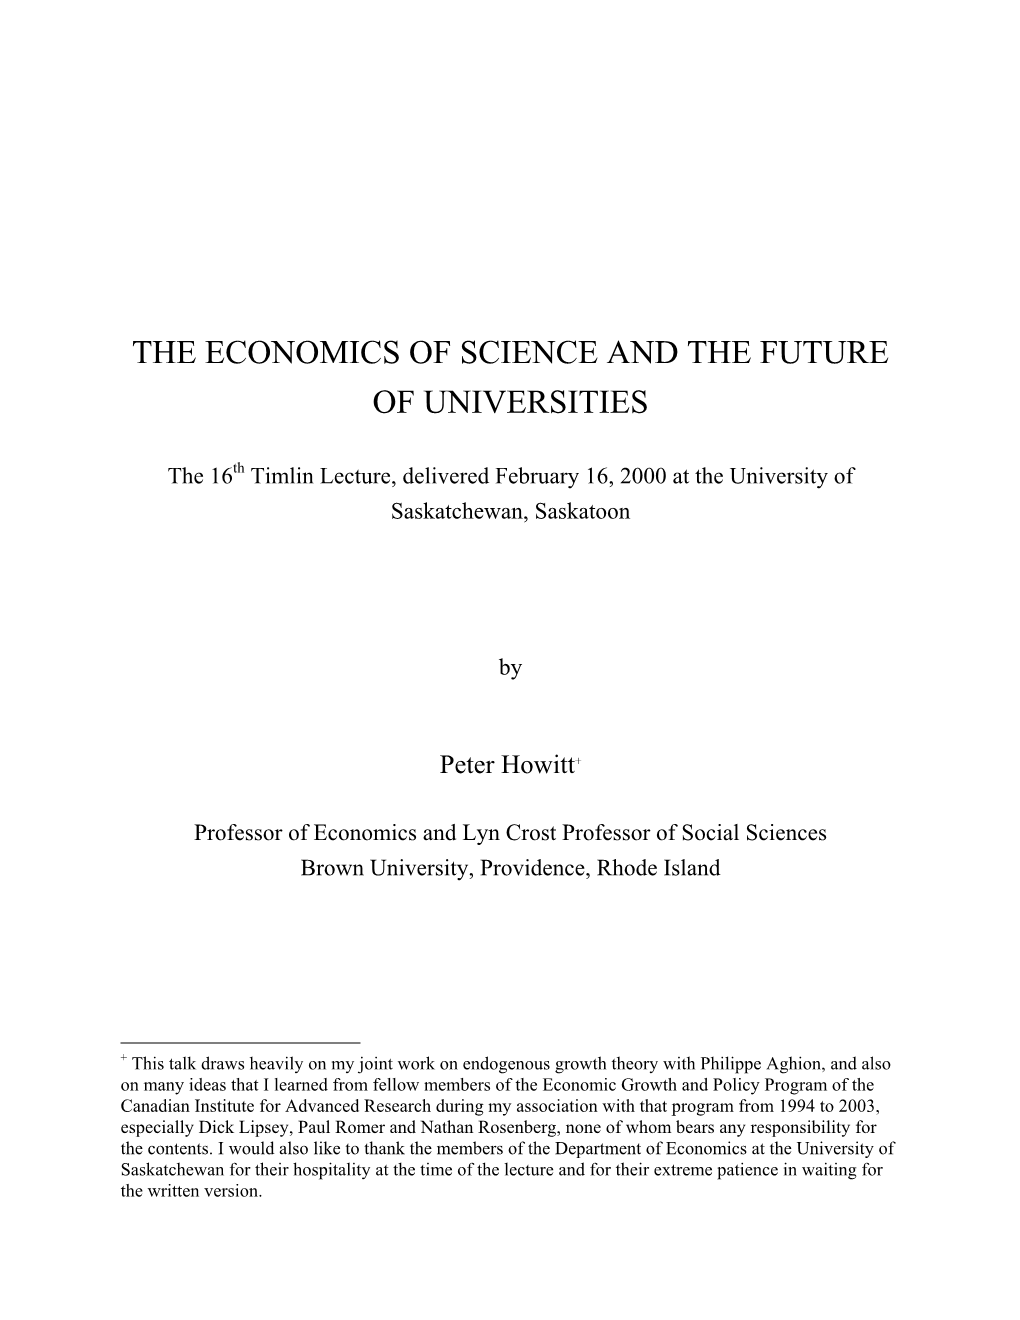 The Economics of Science and the Future of Universities